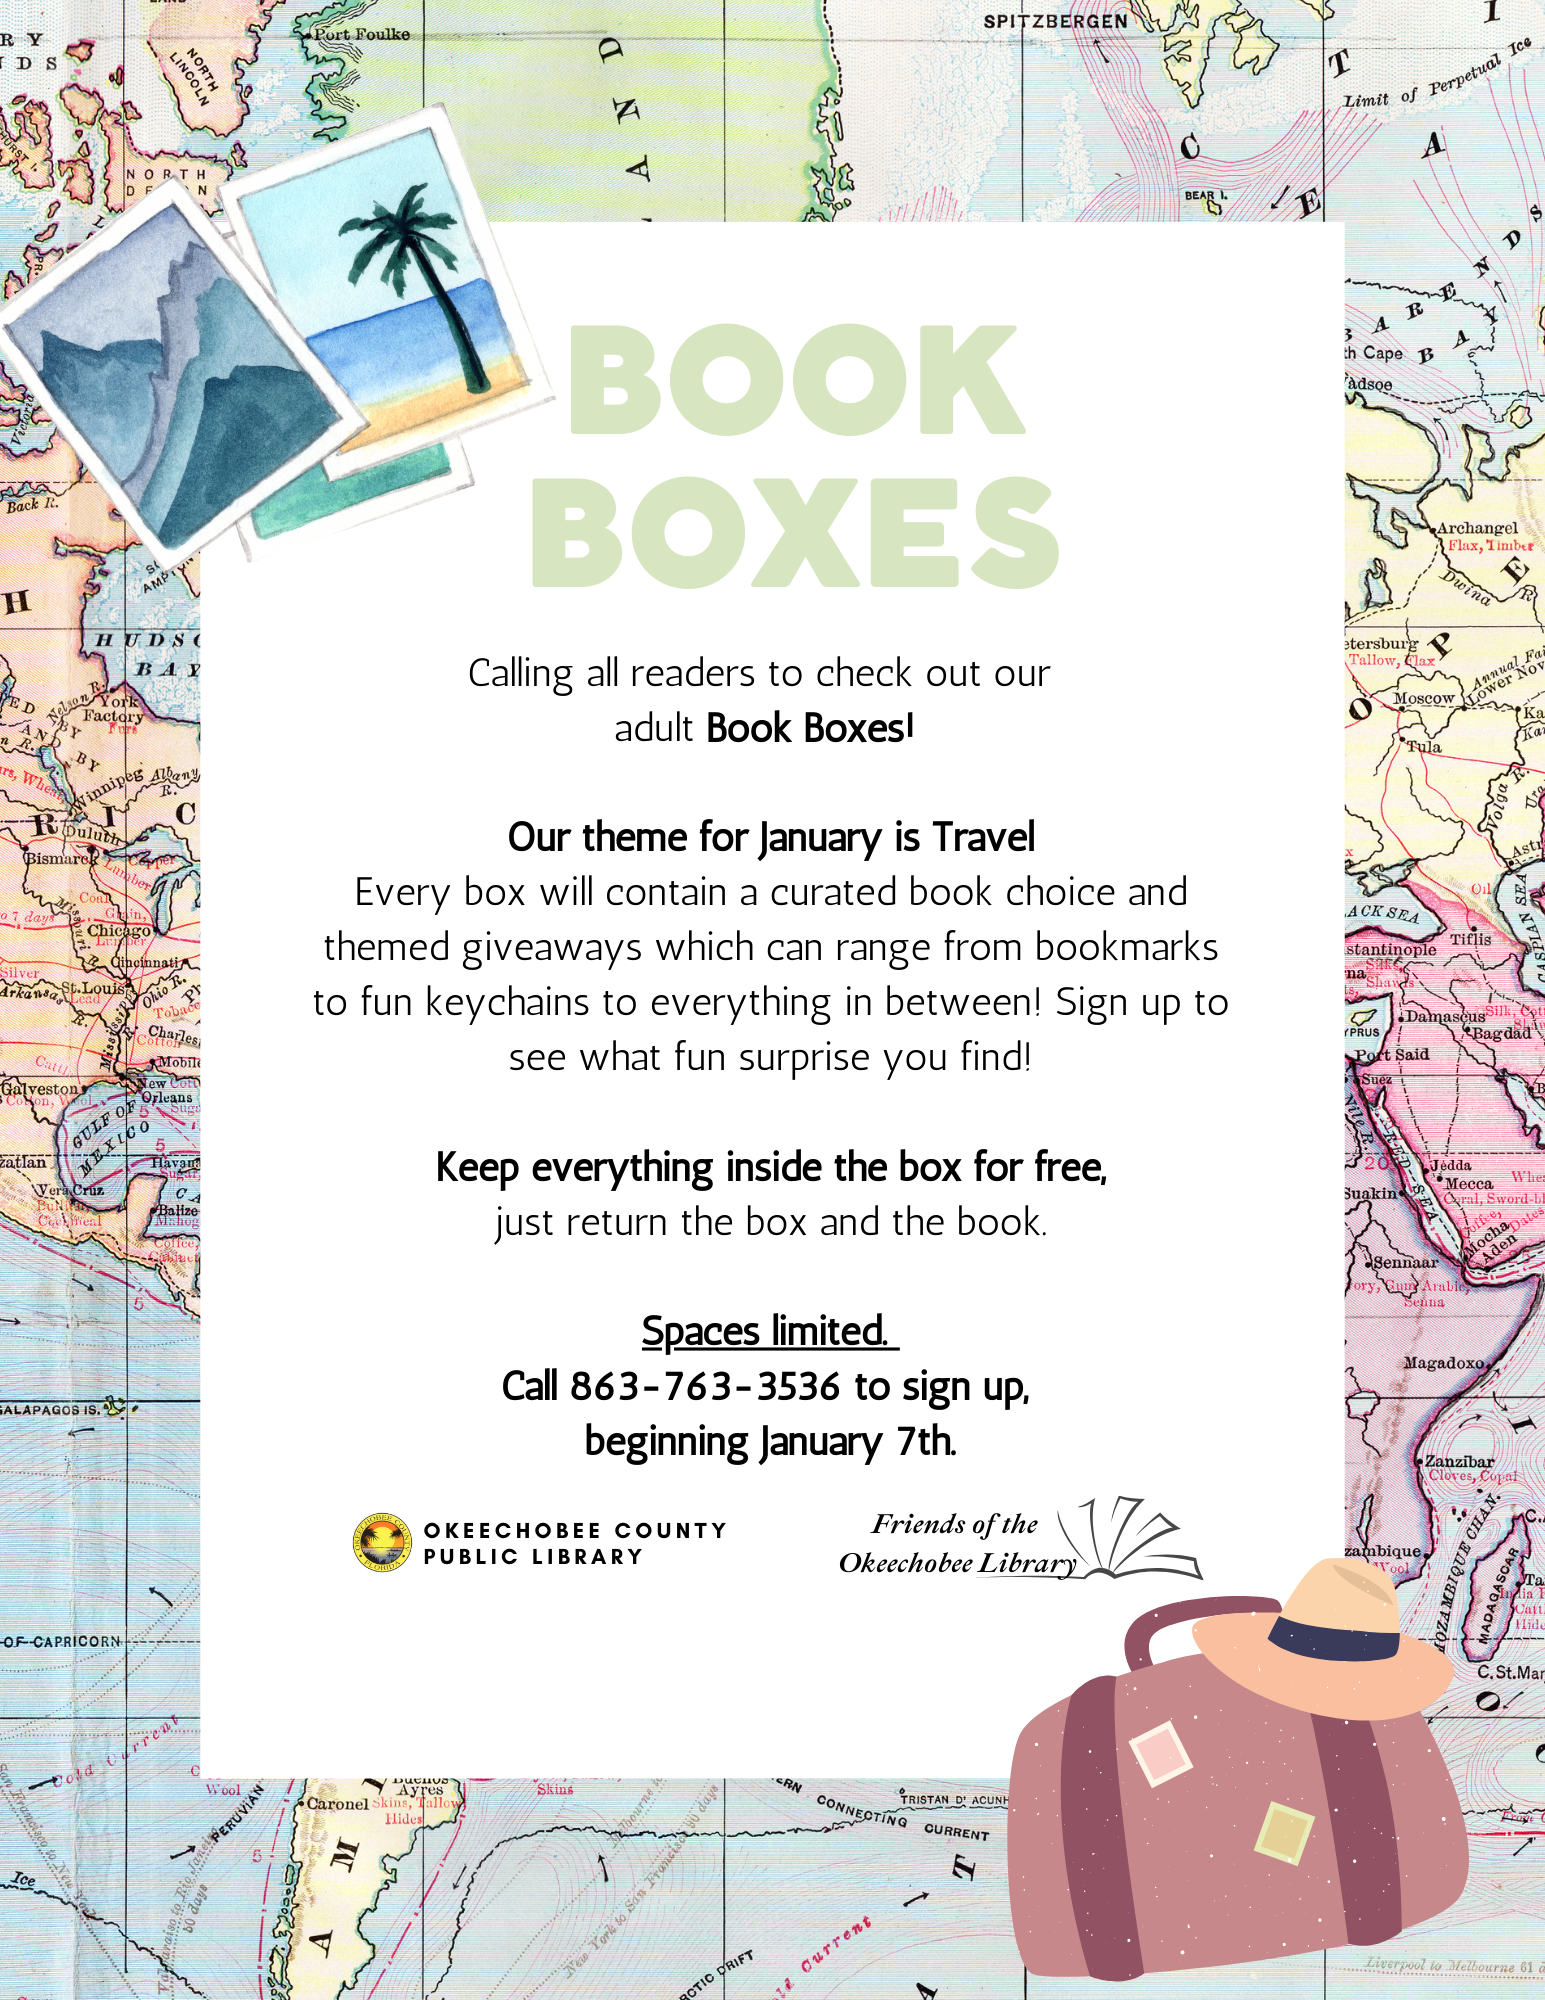 "January Book Boxes! Every box will contain a curated book choice and themed giveaways which can range from bookmarks to fun keychains to everything in between! Sign up to see what fun surprise you find!"